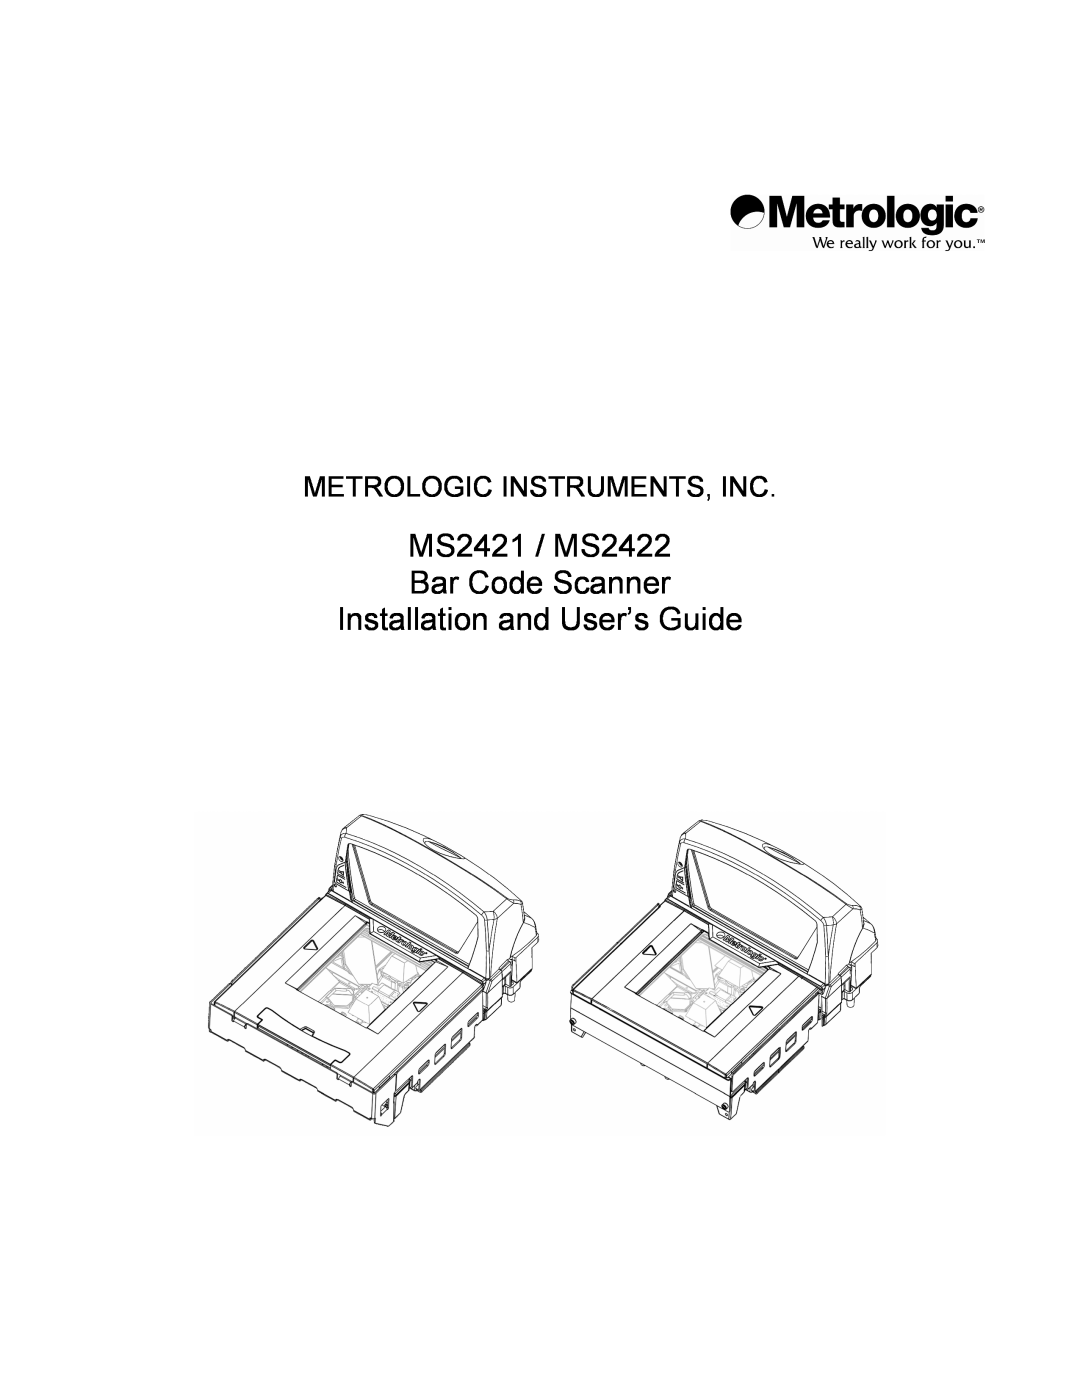 Metrologic Instruments manual MS2421 / MS2422 Bar Code Scanner Installation and User’s Guide 